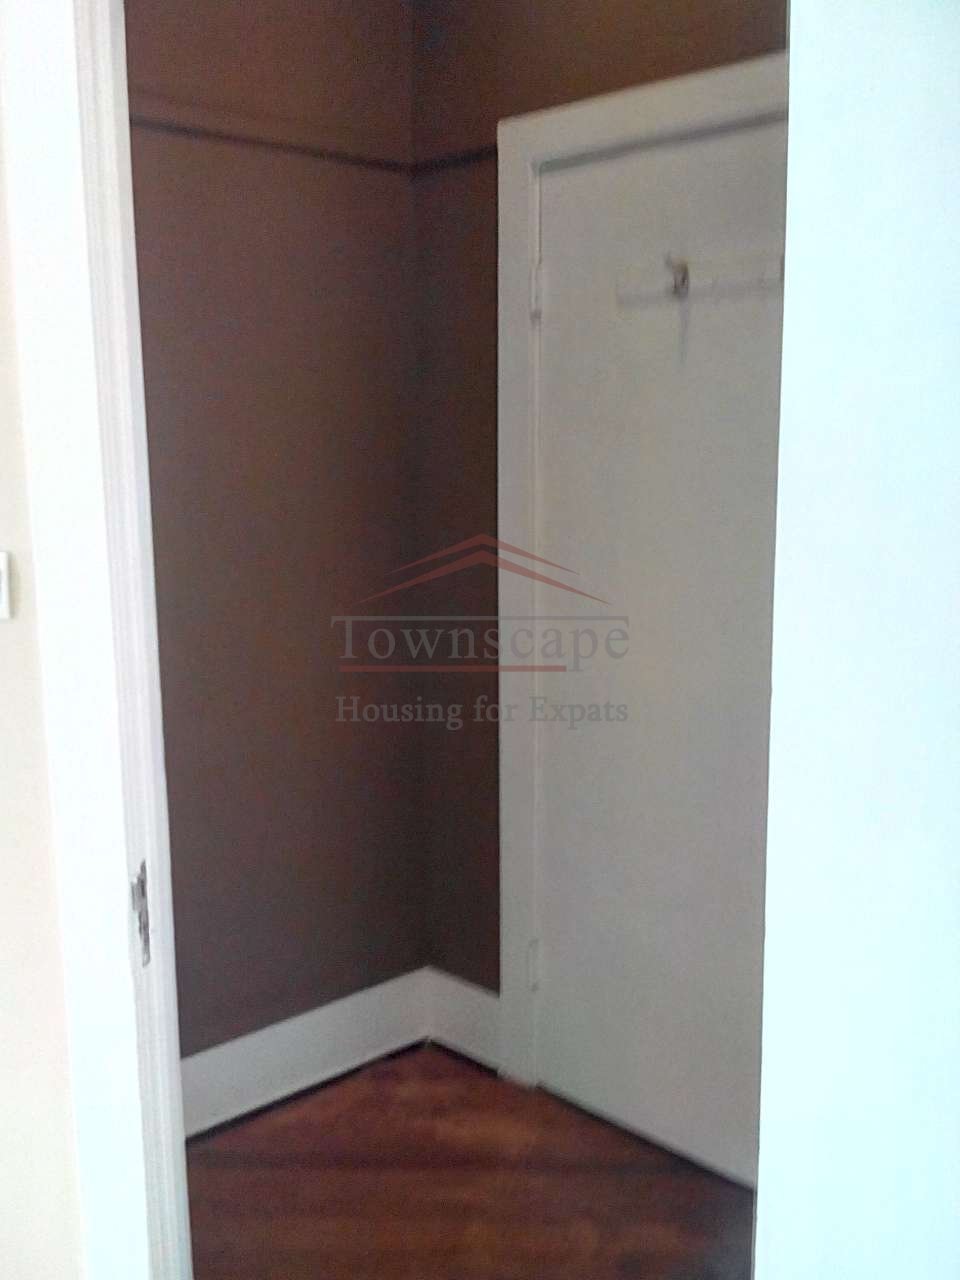  Perfect 2 Bedroom Lane House in Central Shanghai South Shanxi rd L1&10